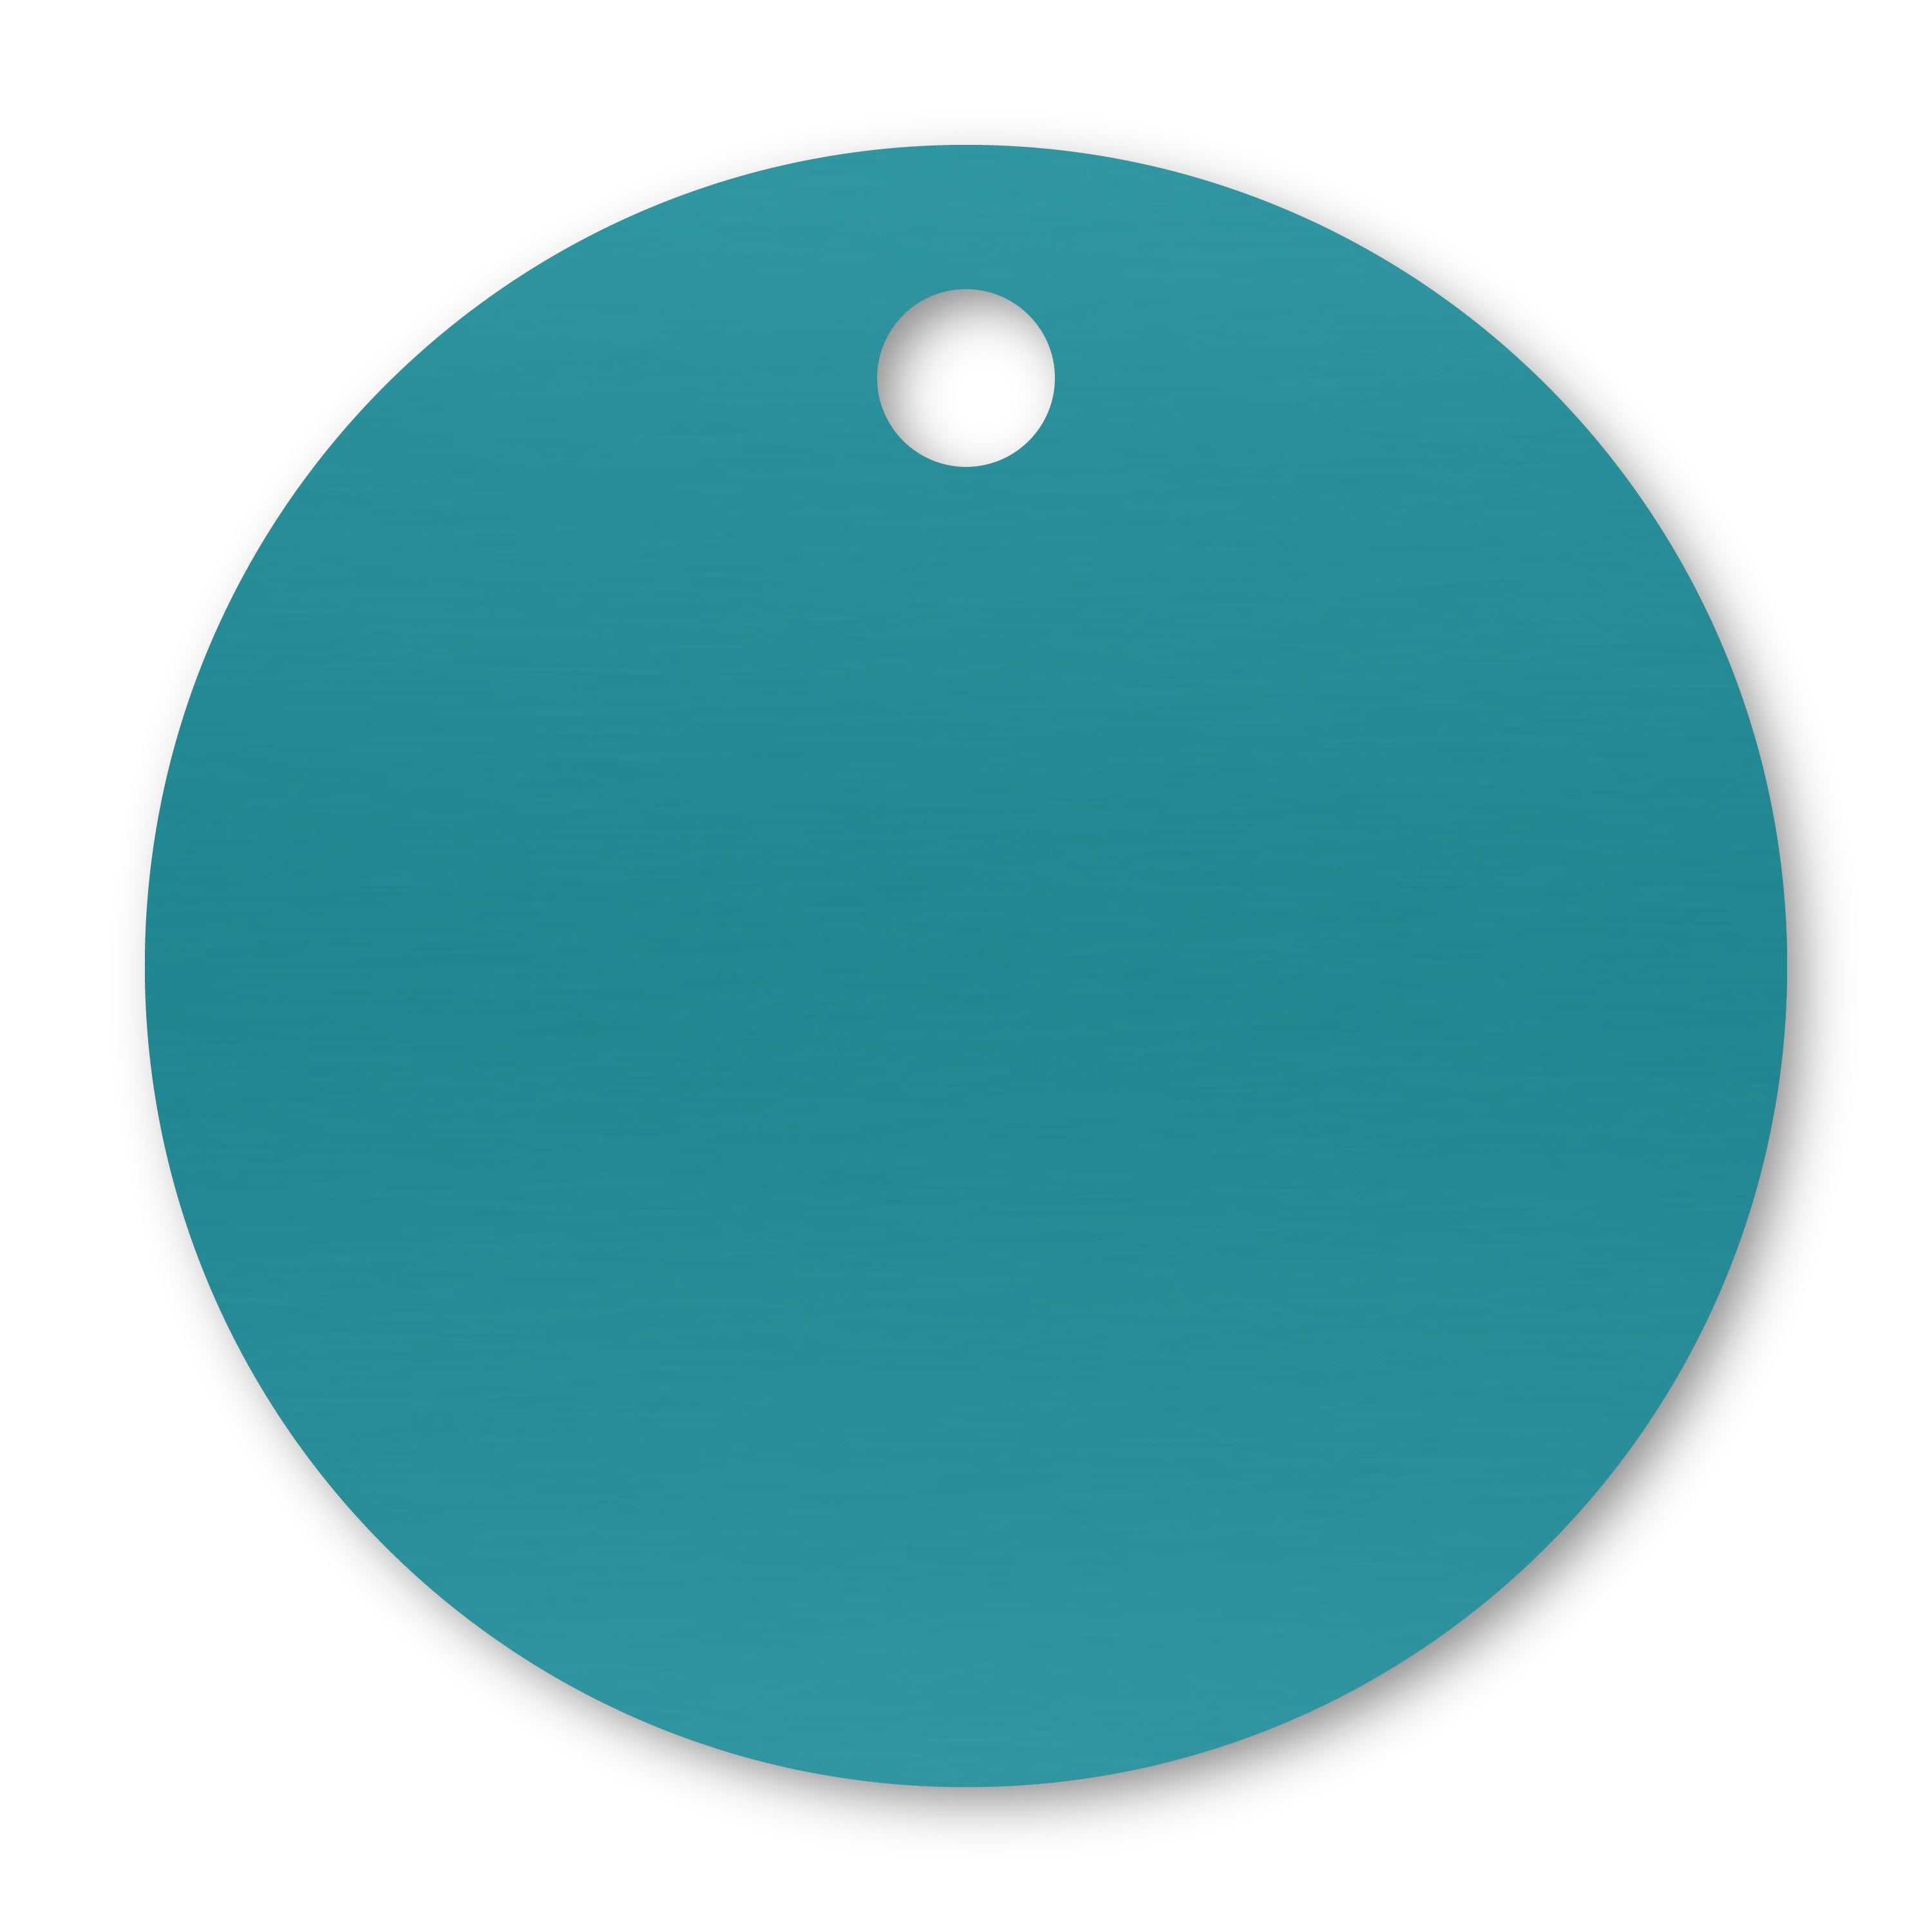 Anodized Aluminum Round Tags, 1-1/2" with 1/8" Hole, Laser Engraved Metal Tags Craftworks NW Turquoise 